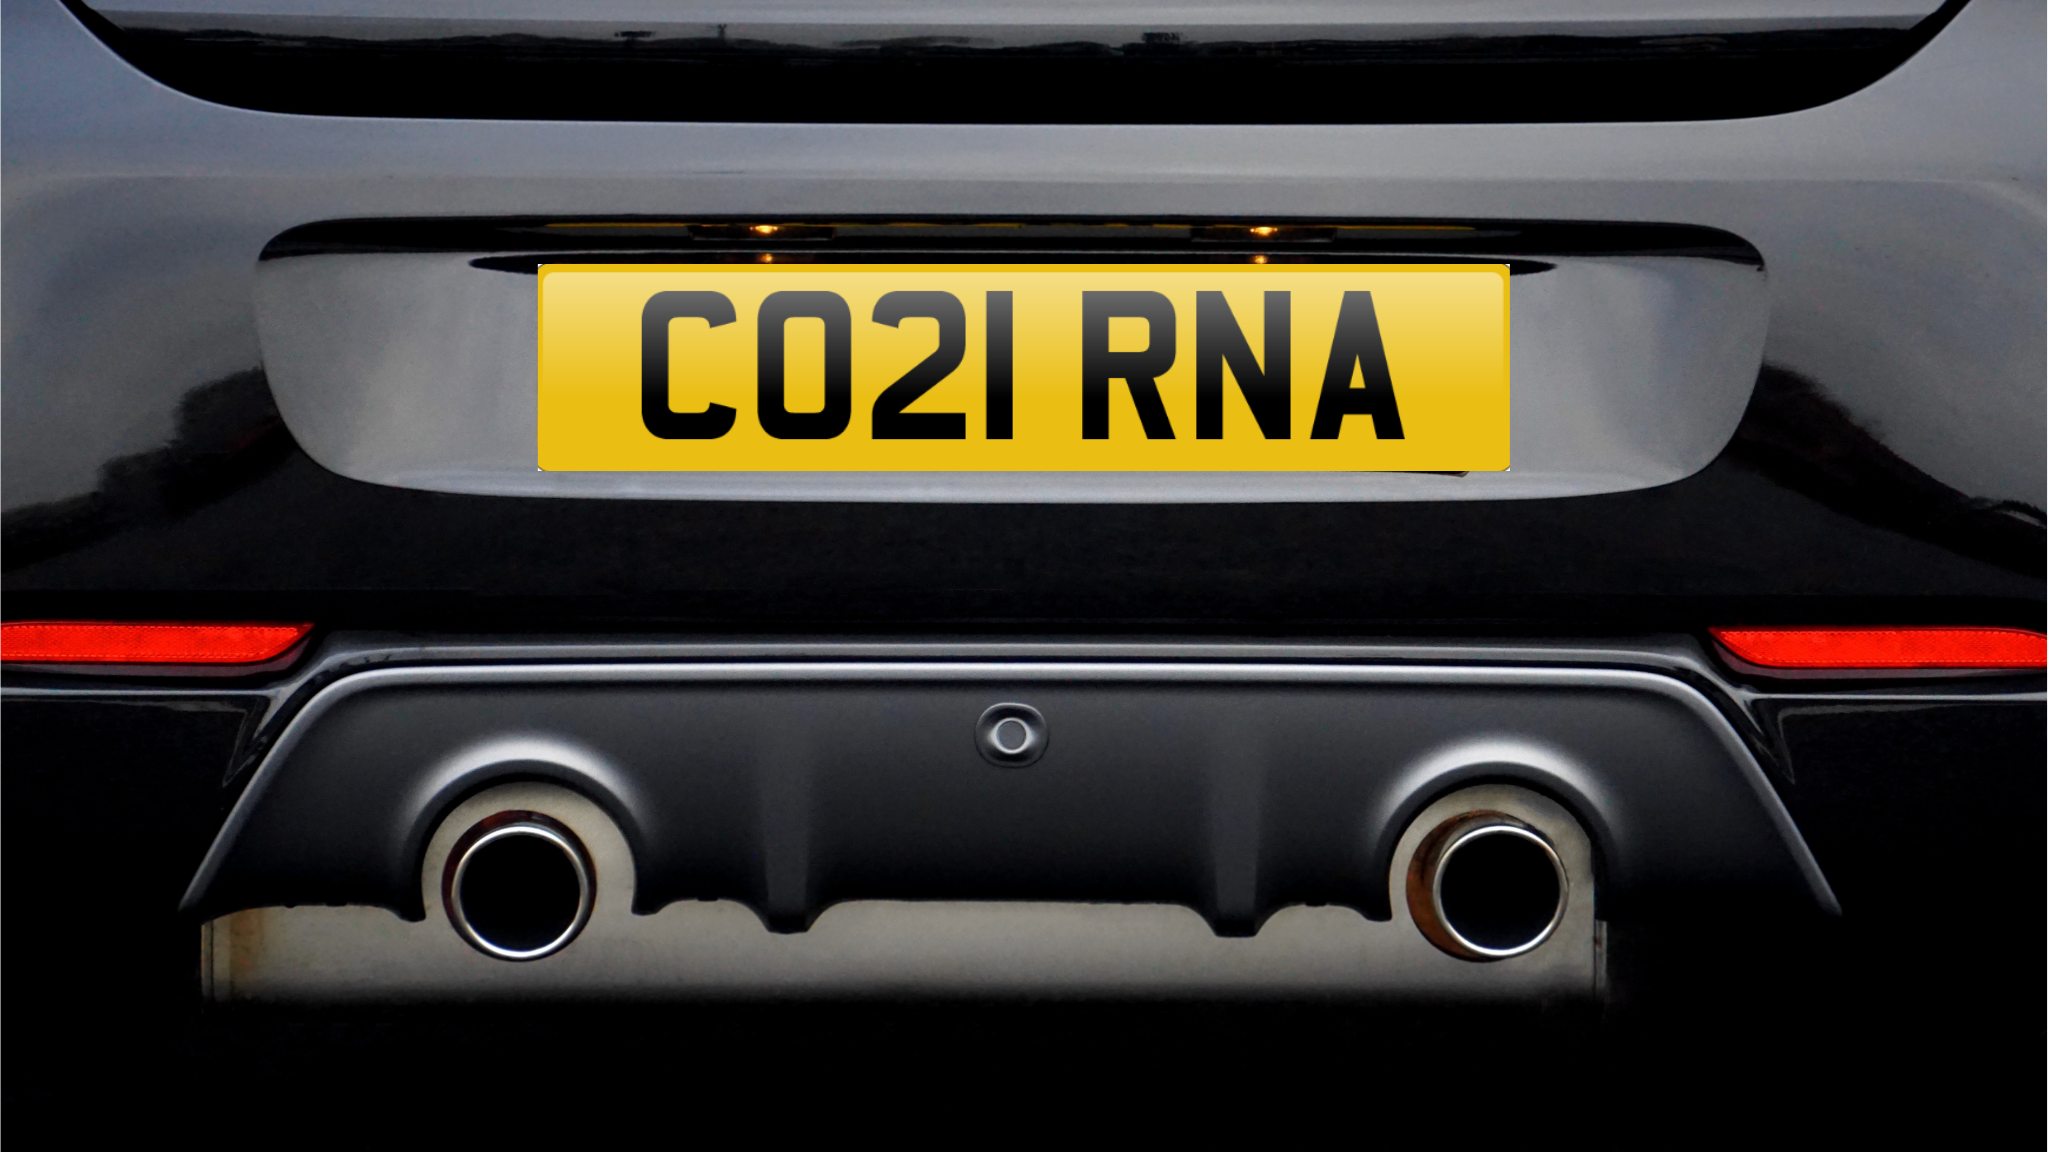 Banned! The Registration Plates That Could Offend image